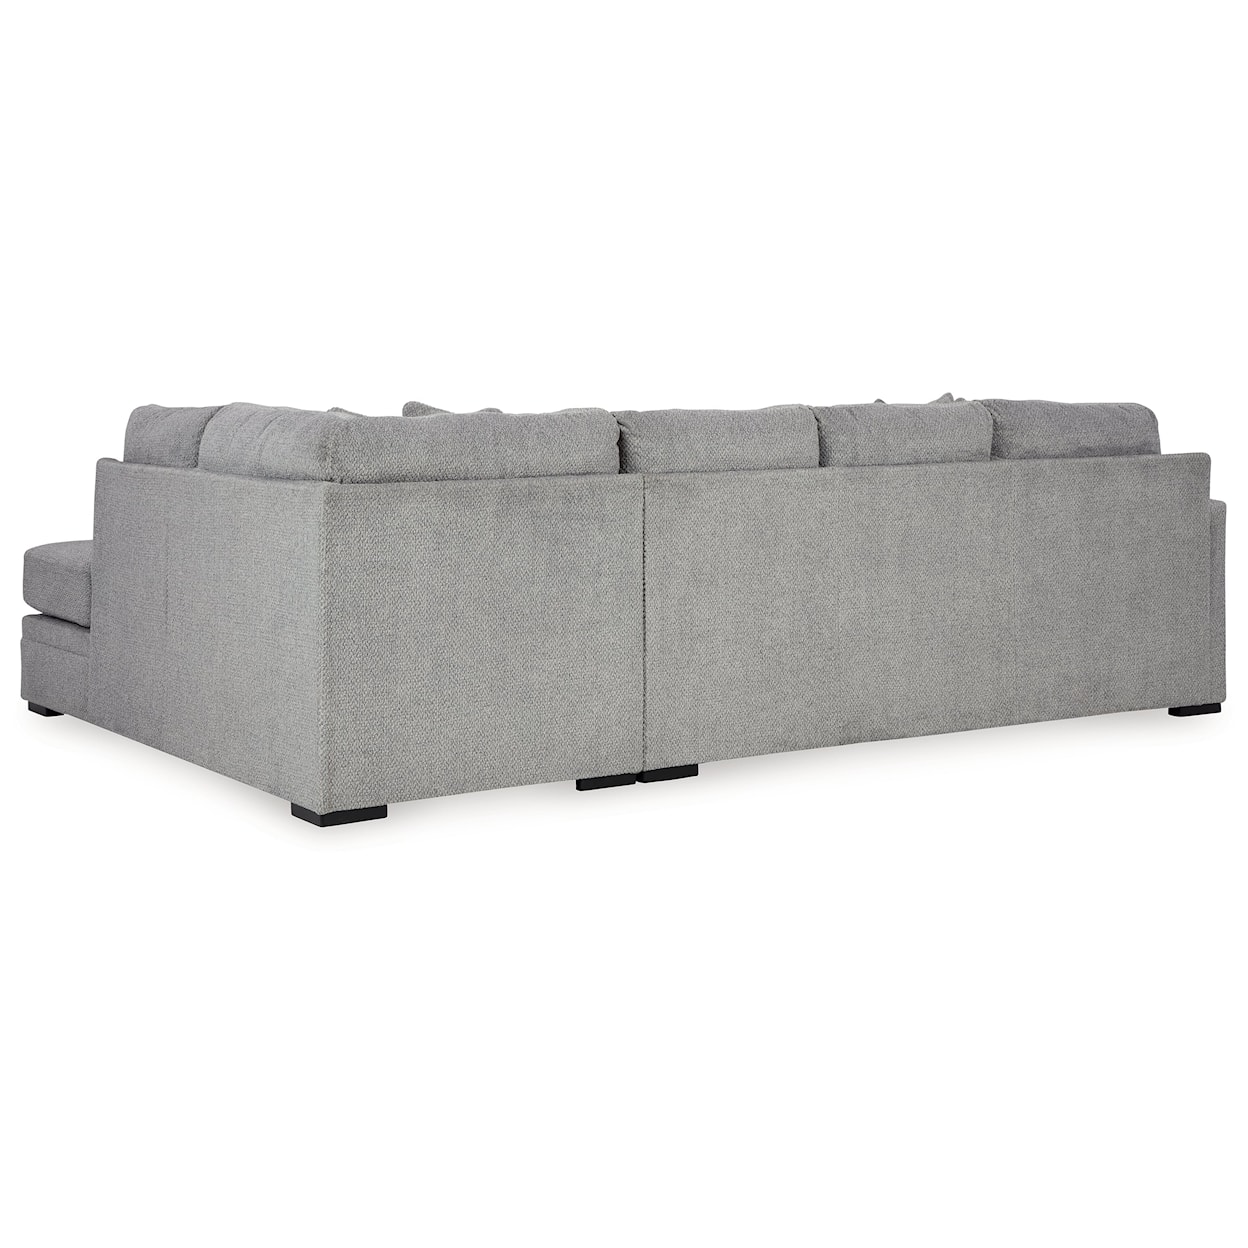 Signature Design by Ashley Casselbury Sectional